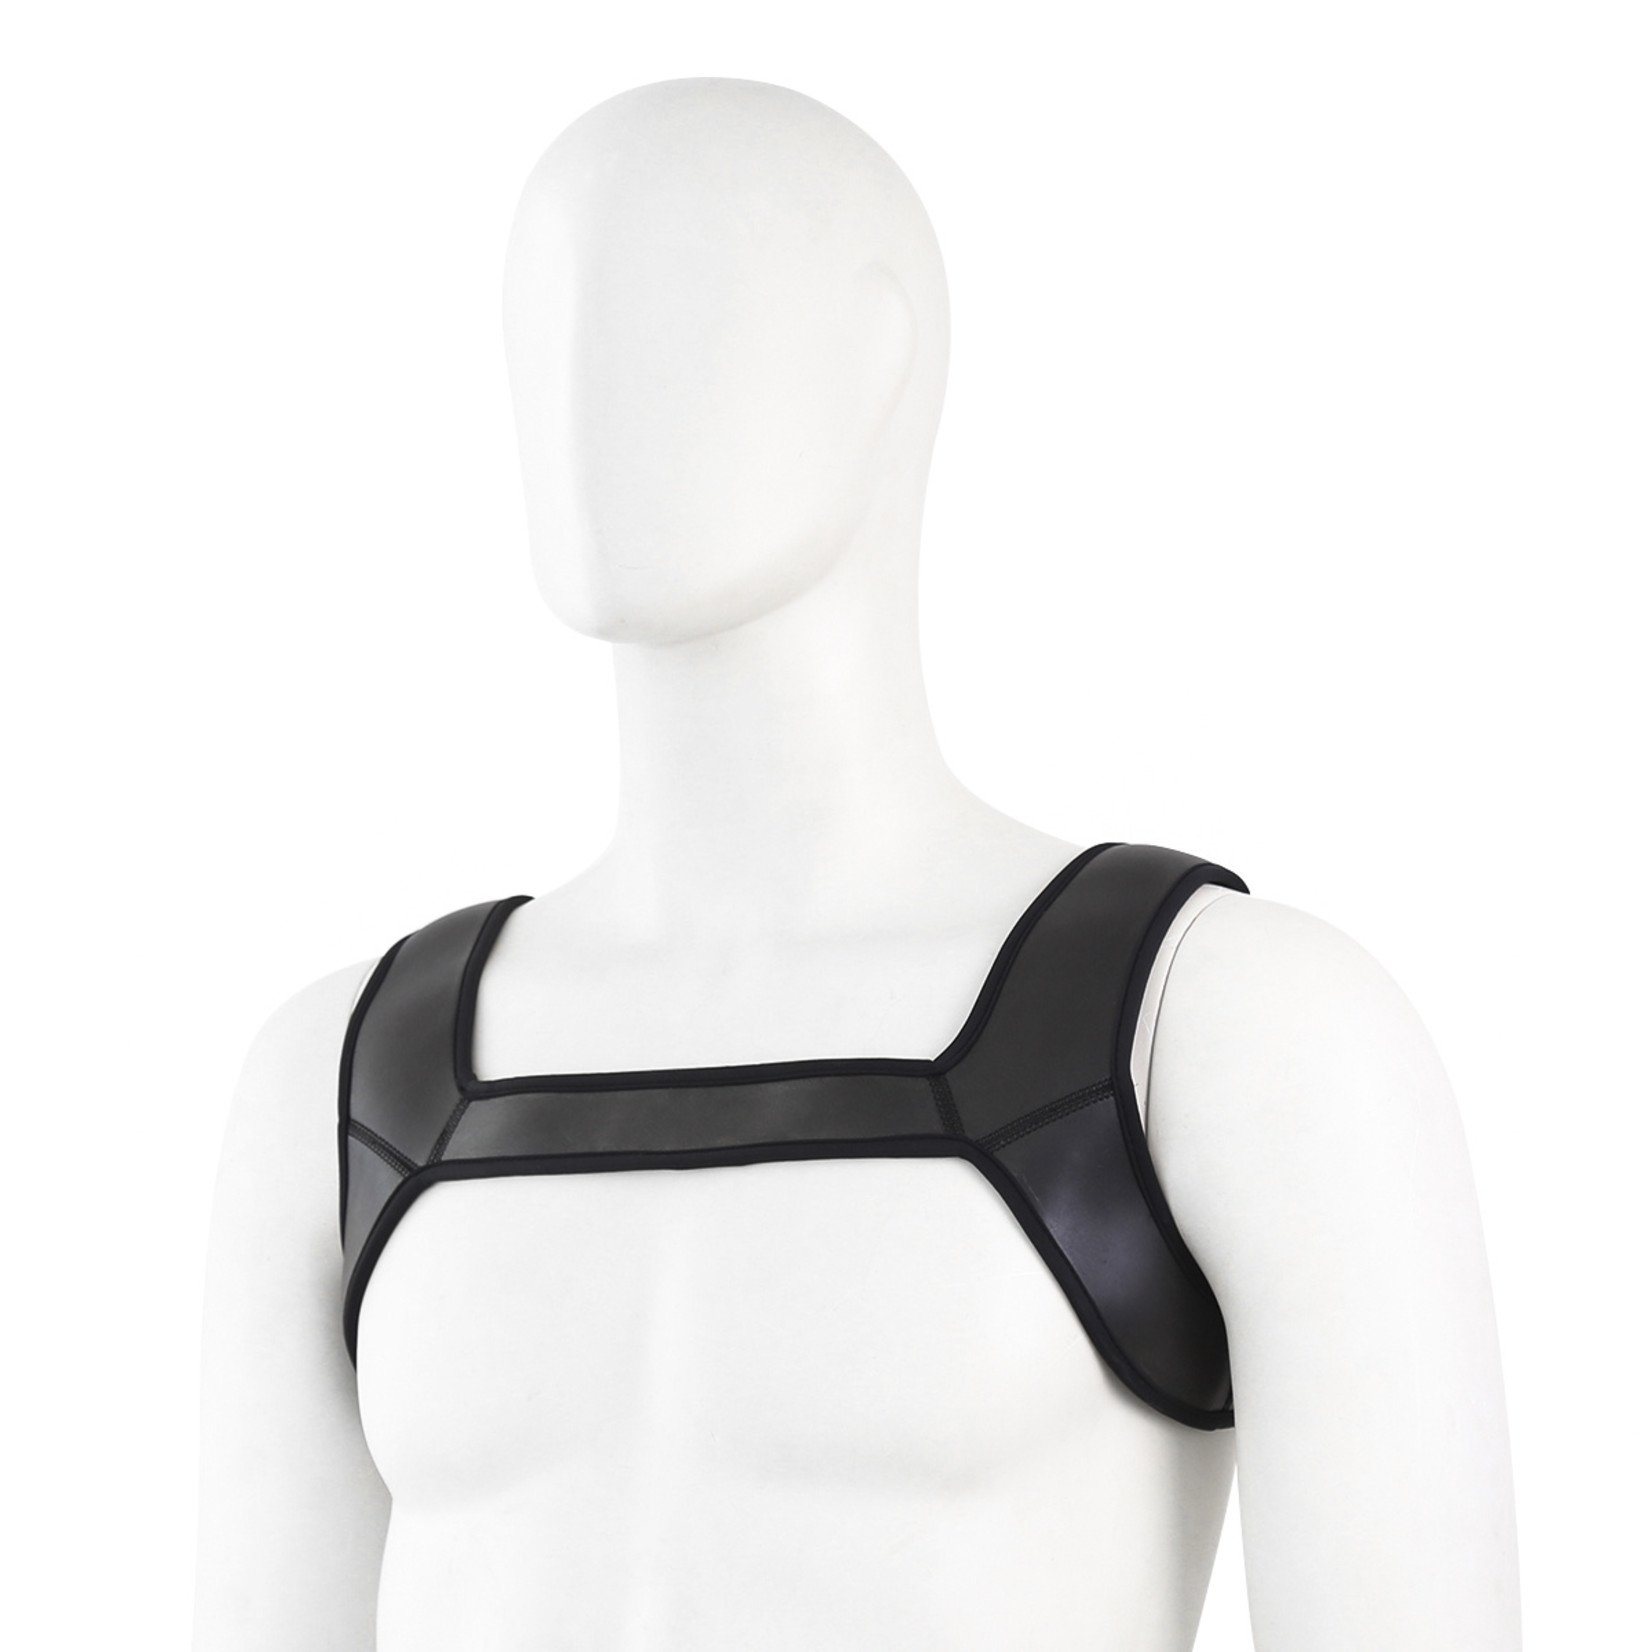 KIOTOS Leather Harness Sport Muscle Protector M